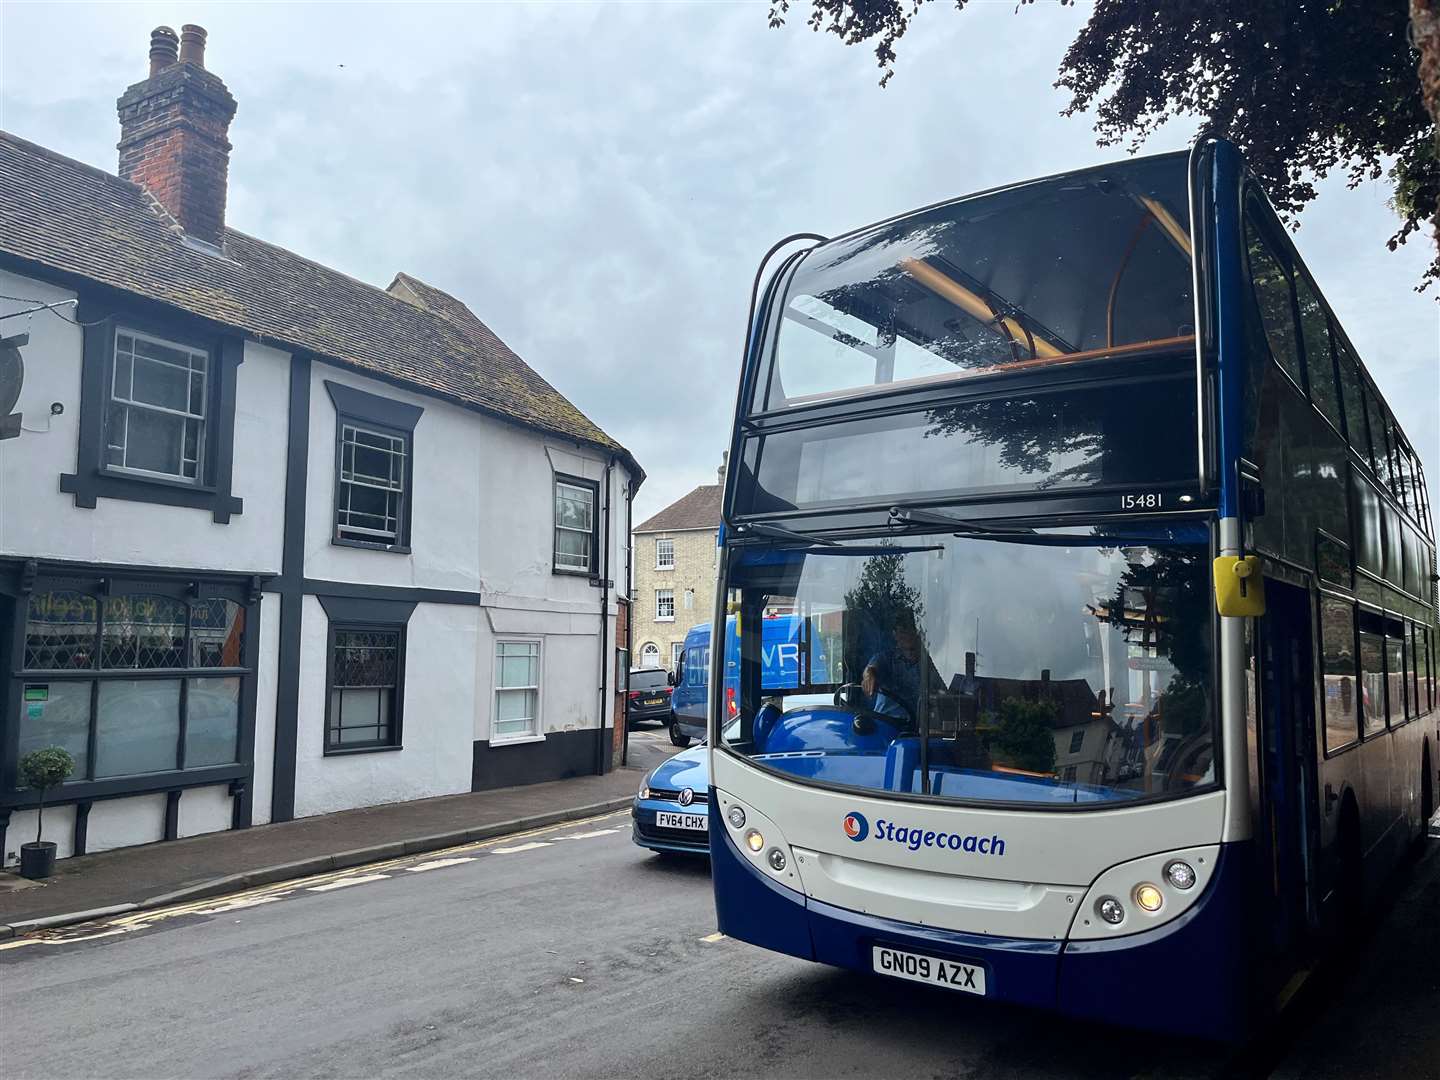 Residents in Wye and Little Burton were shocked when they discovered that Stagecoach routes were to be scrapped